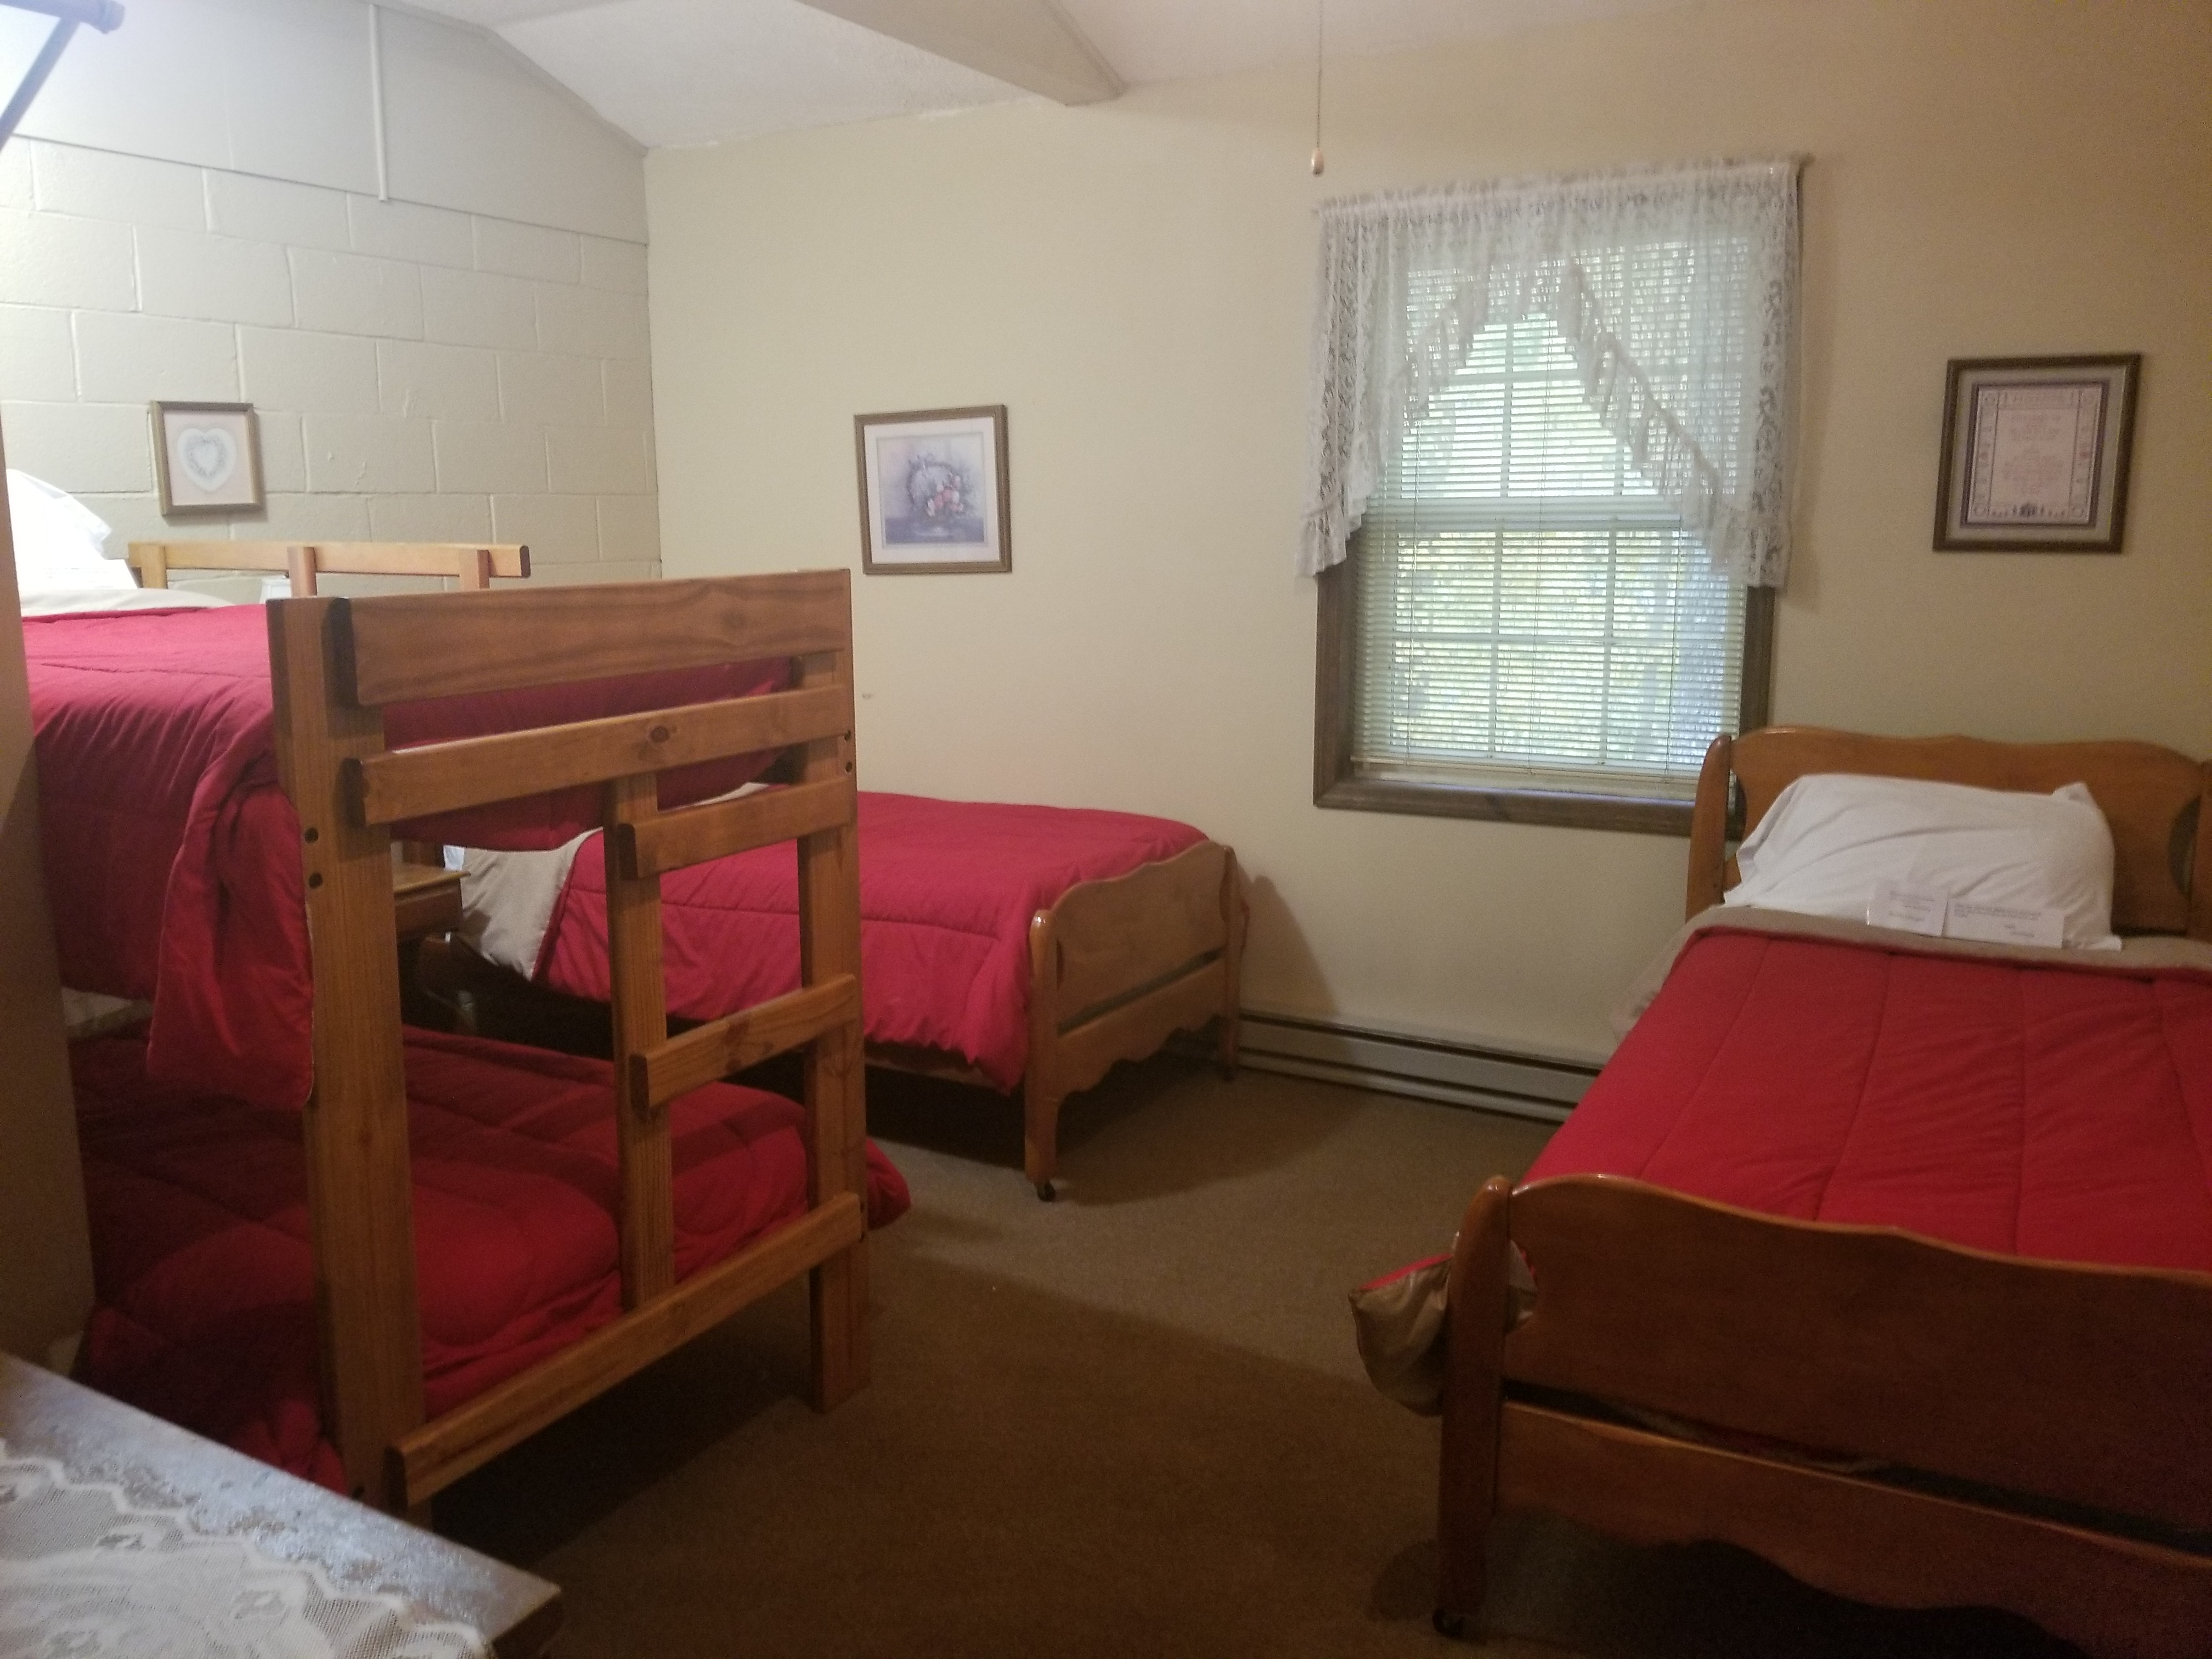 Room 6 - Two Twin Beds & Bunk Beds